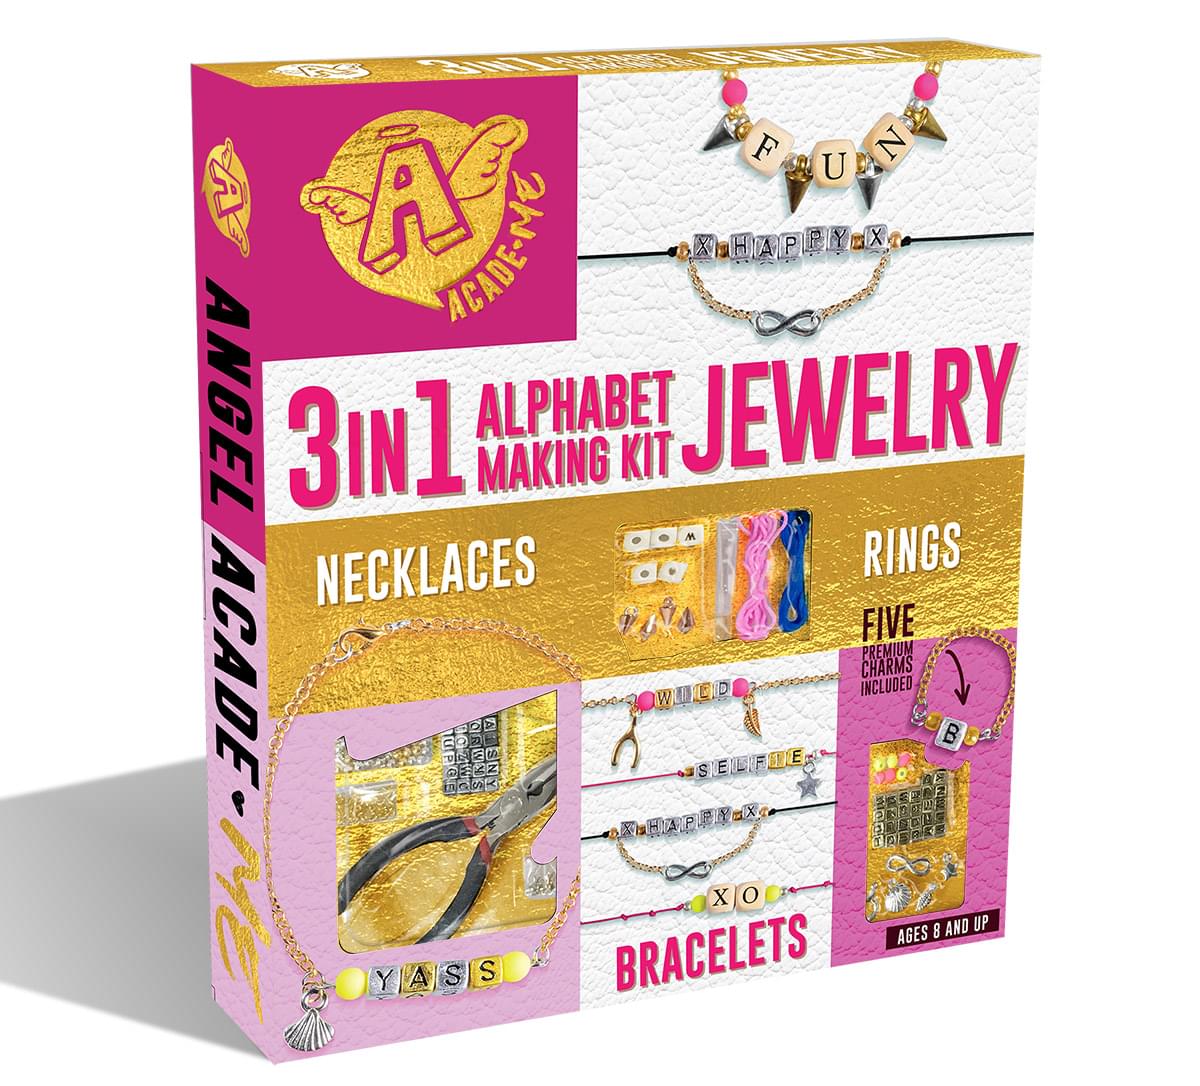 3 In 1 Alphabet Jewelry Making Kit | Includes 5 Premium Charms